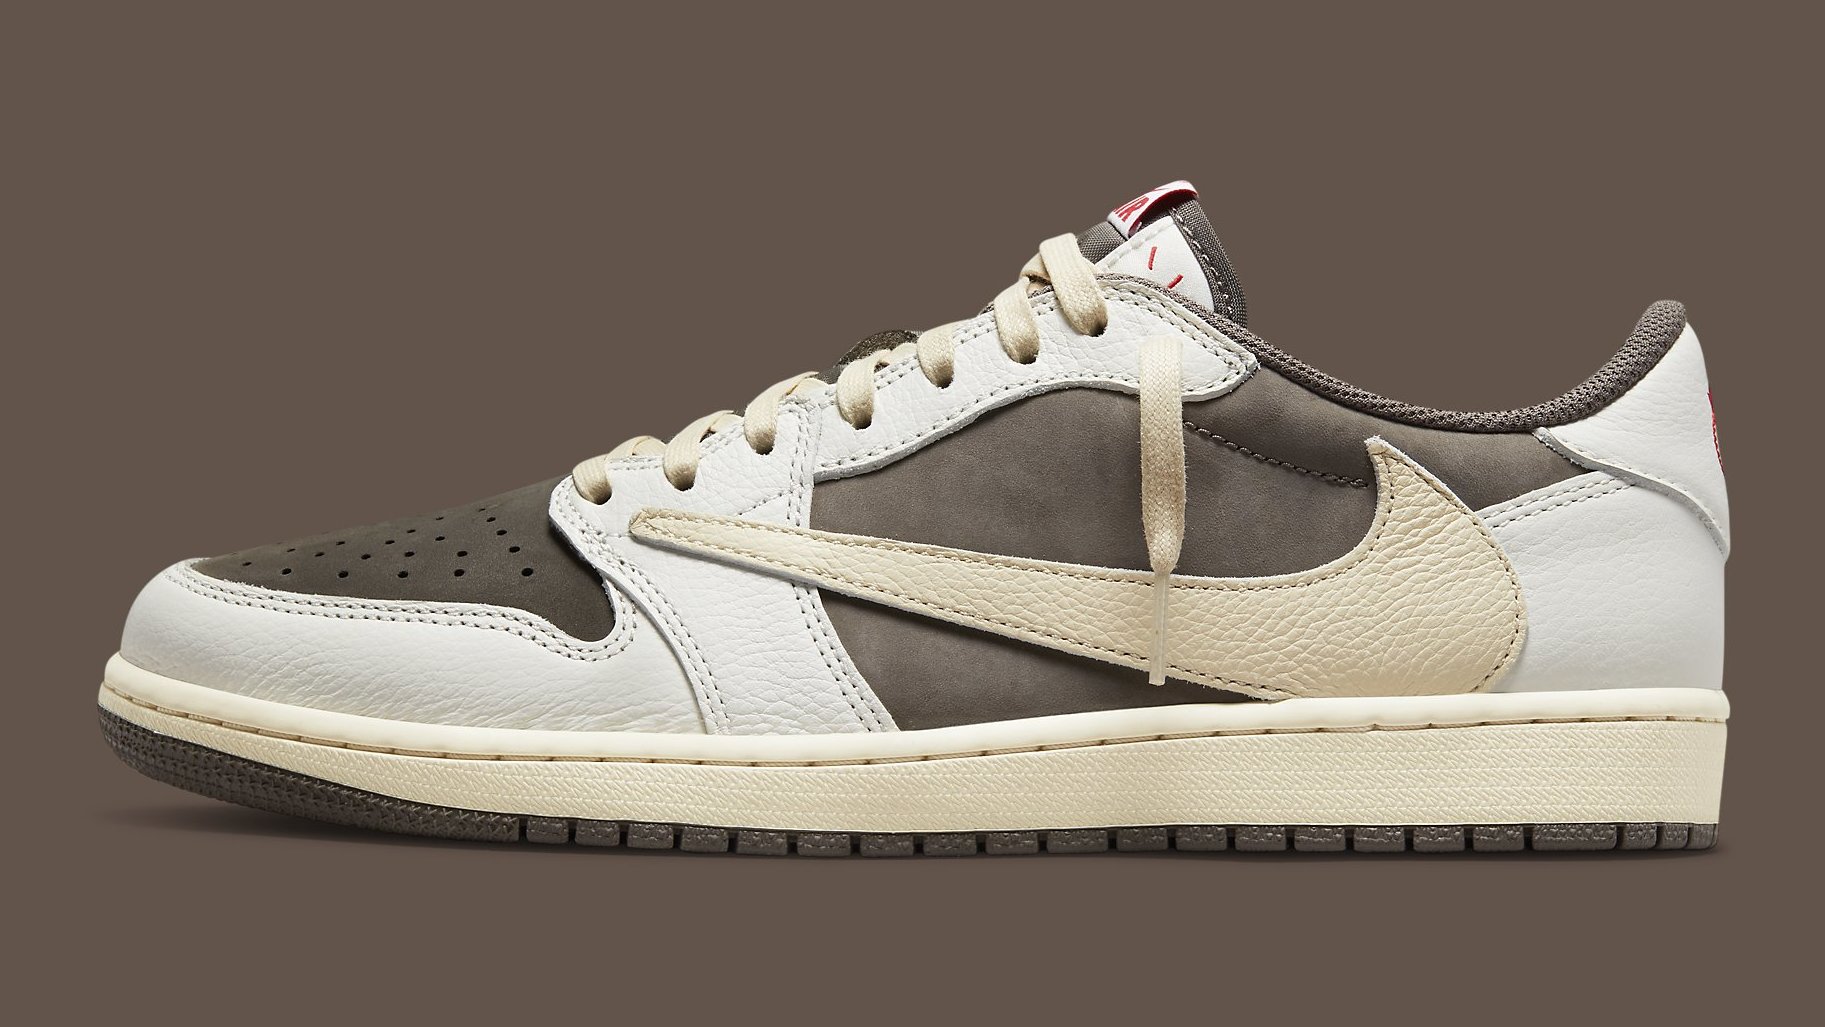 Klan Watt vedholdende A Complete Guide to This Weekend's Sneaker Releases | Complex